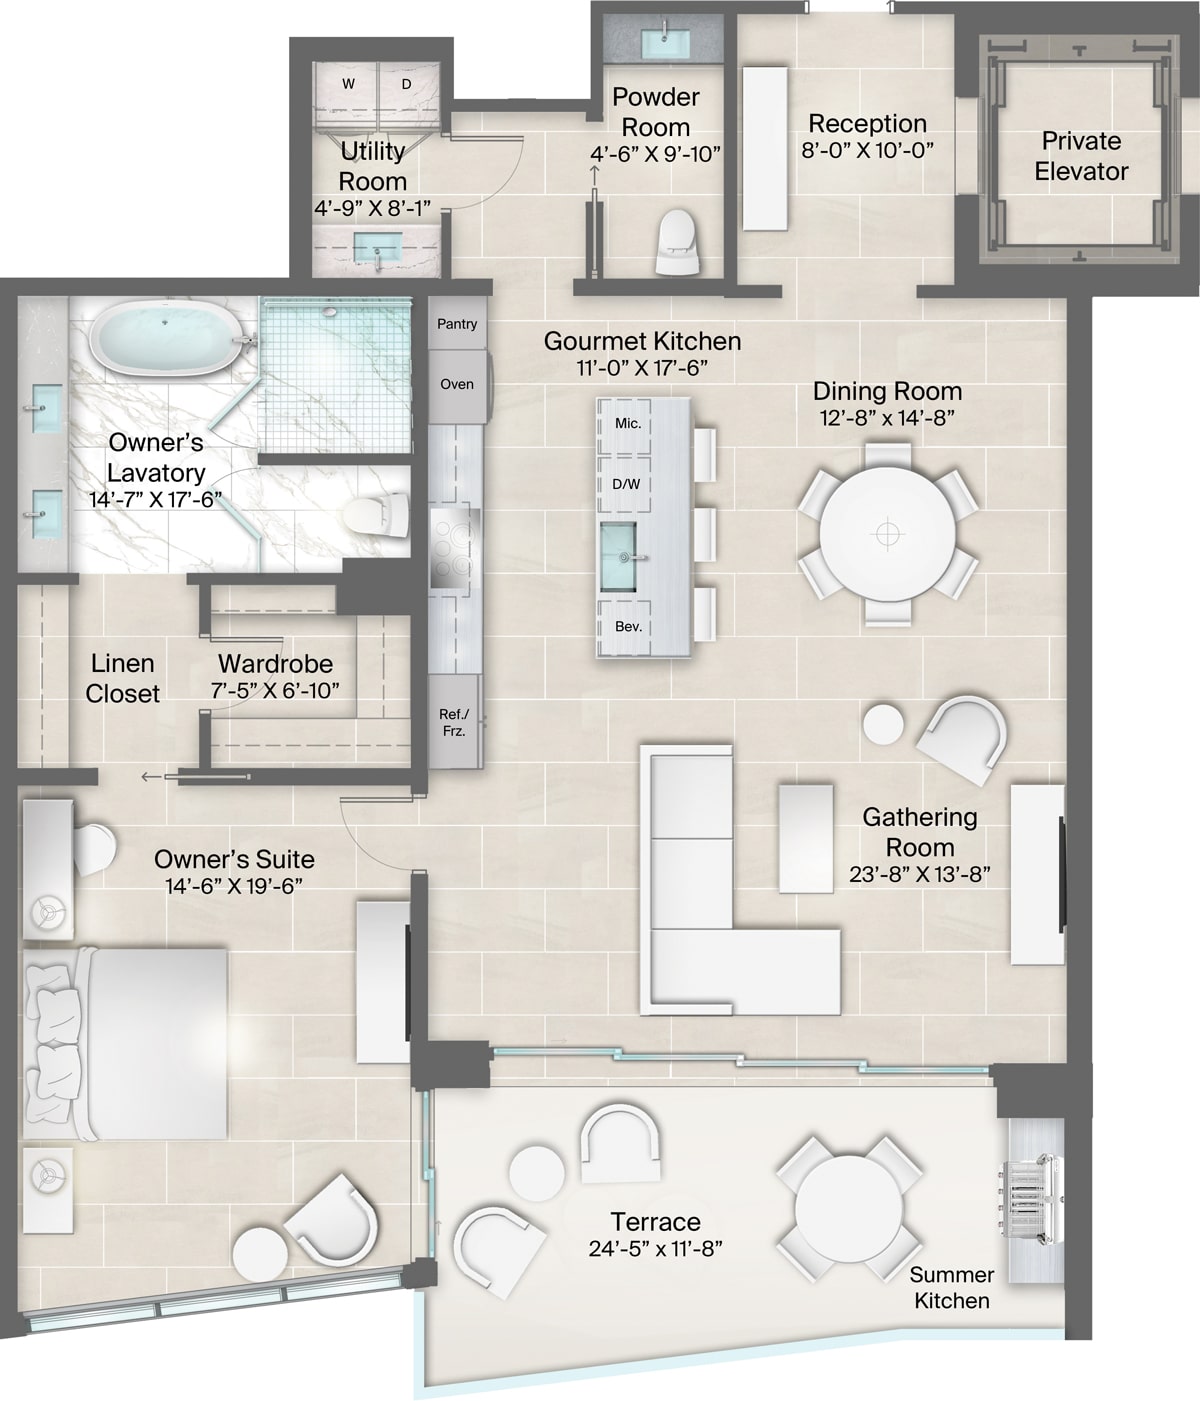 Champagne Building, Plan 15 & 16 Floorplan includes 1 bedroom, 1.5 baths and terrace